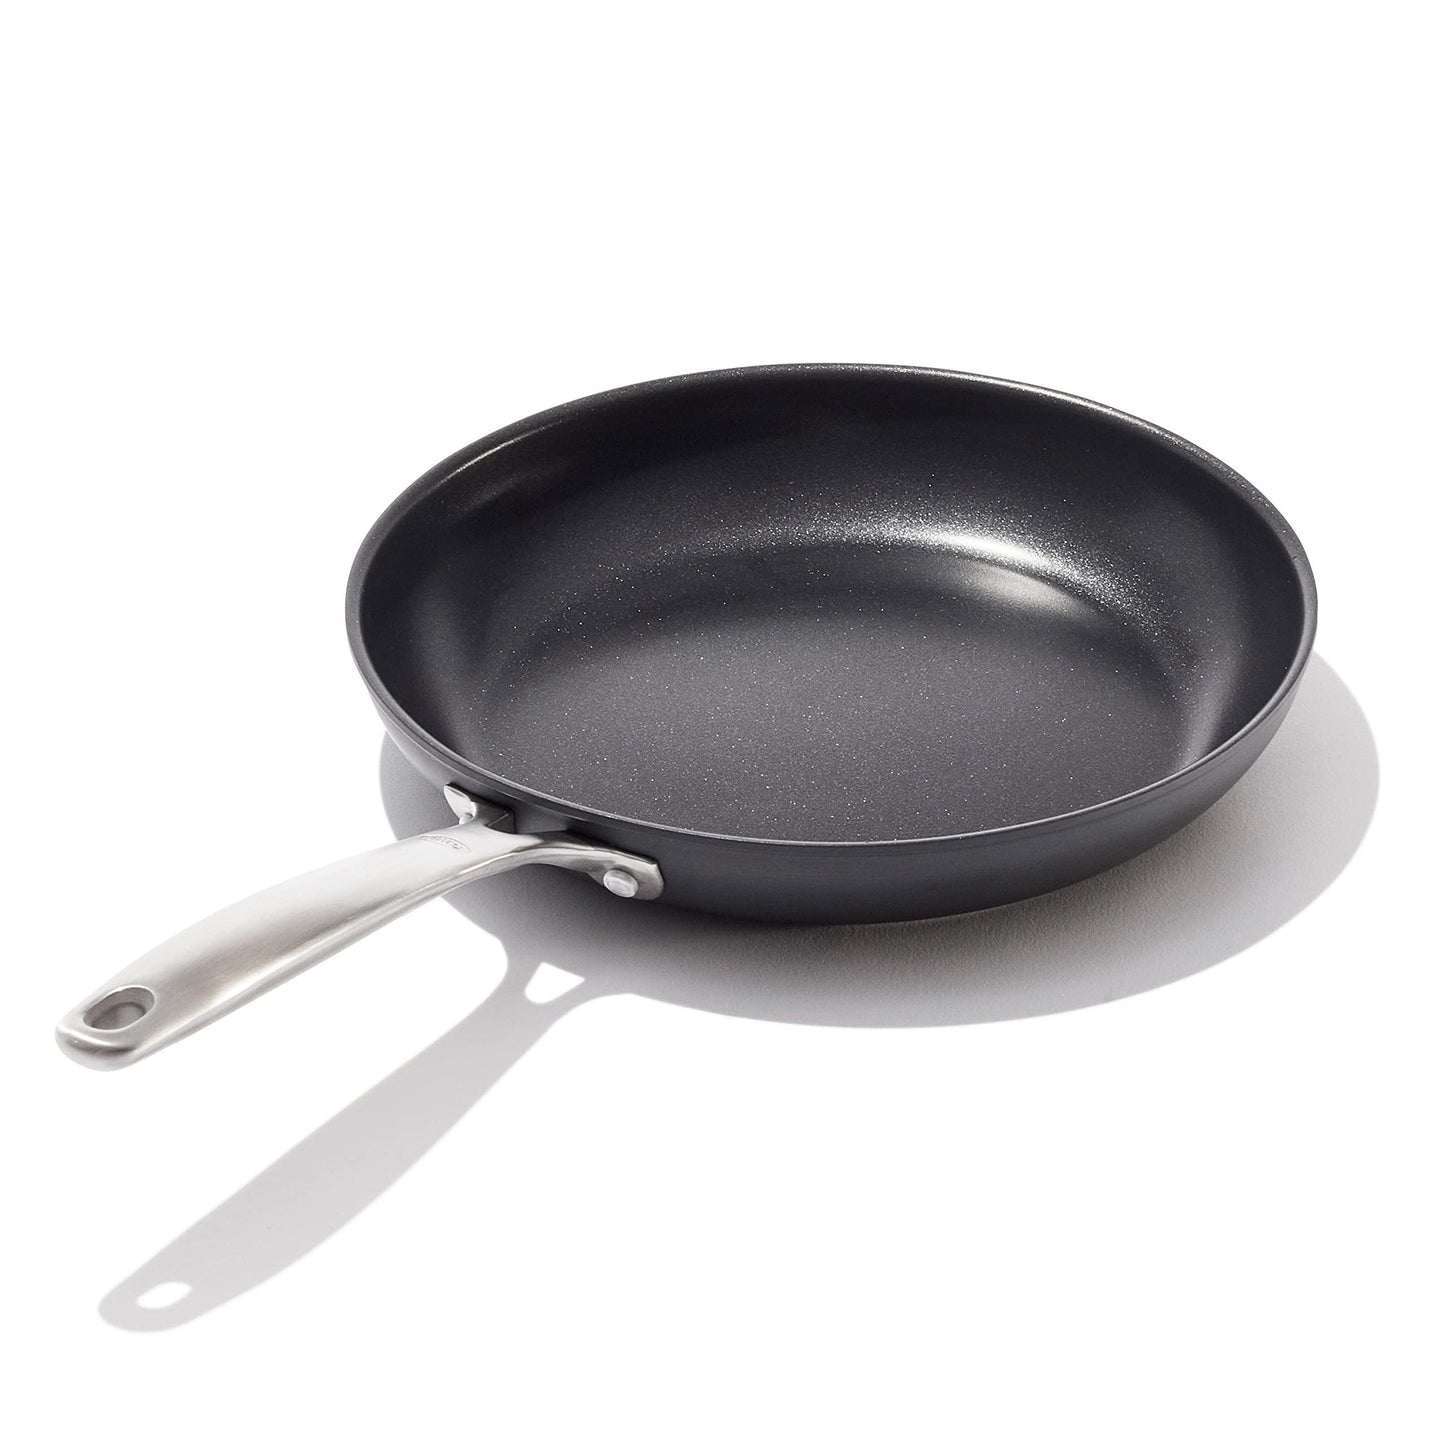 OXO Good Grips Pro 10" Frying Pan Skillet, 3-Layered German Engineered Nonstick Coating, Stainless Steel Handle, Dishwasher Safe, Oven Safe, Black - CookCave